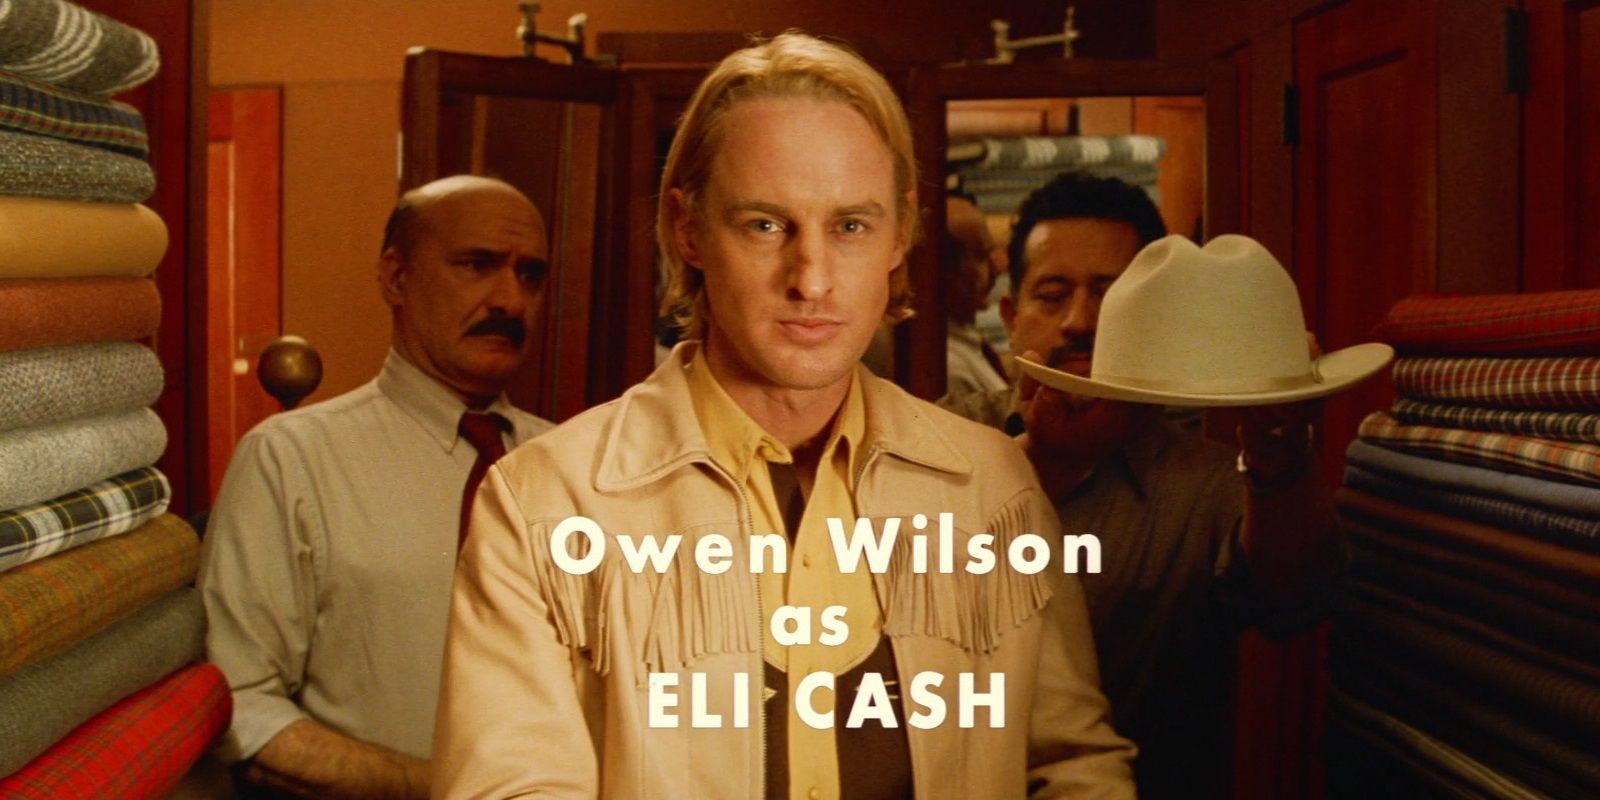 Owen Wilson in the opening credits of The Royal Tenenbaums